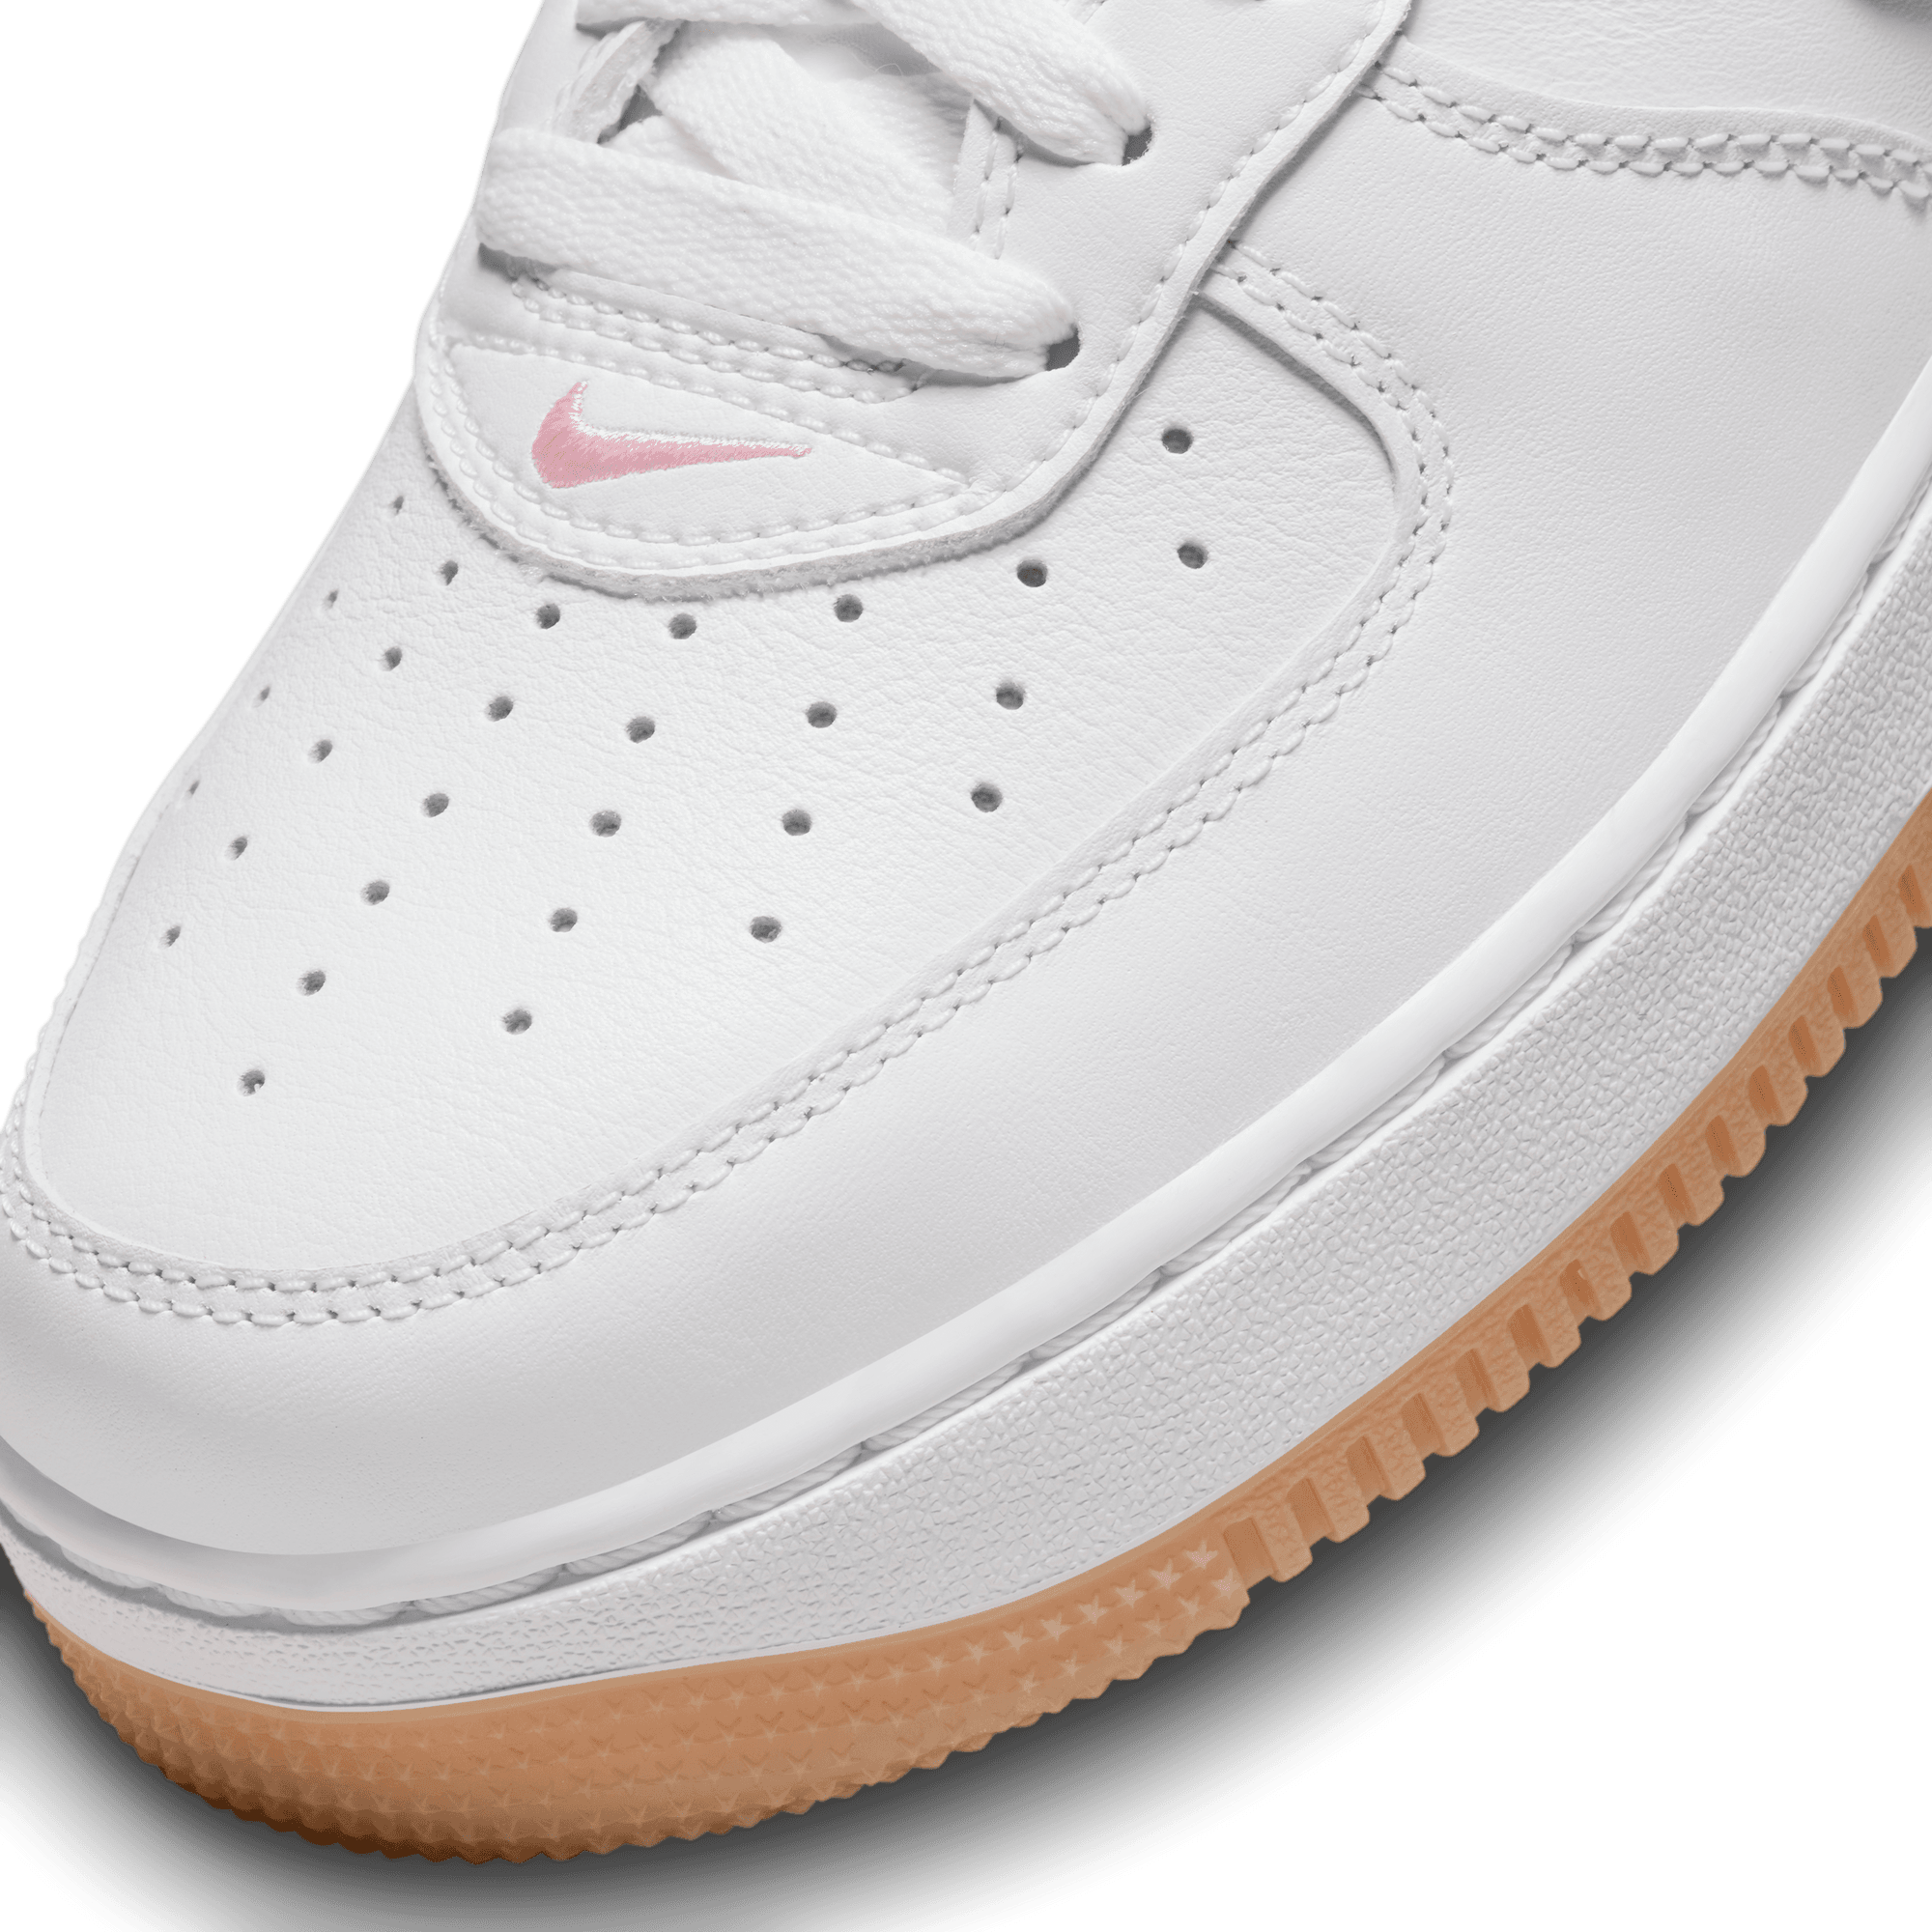 AIR FORCE 1 LOW RETRO "COLOR OF THE MONTH" - WHITE / PINK / GUM